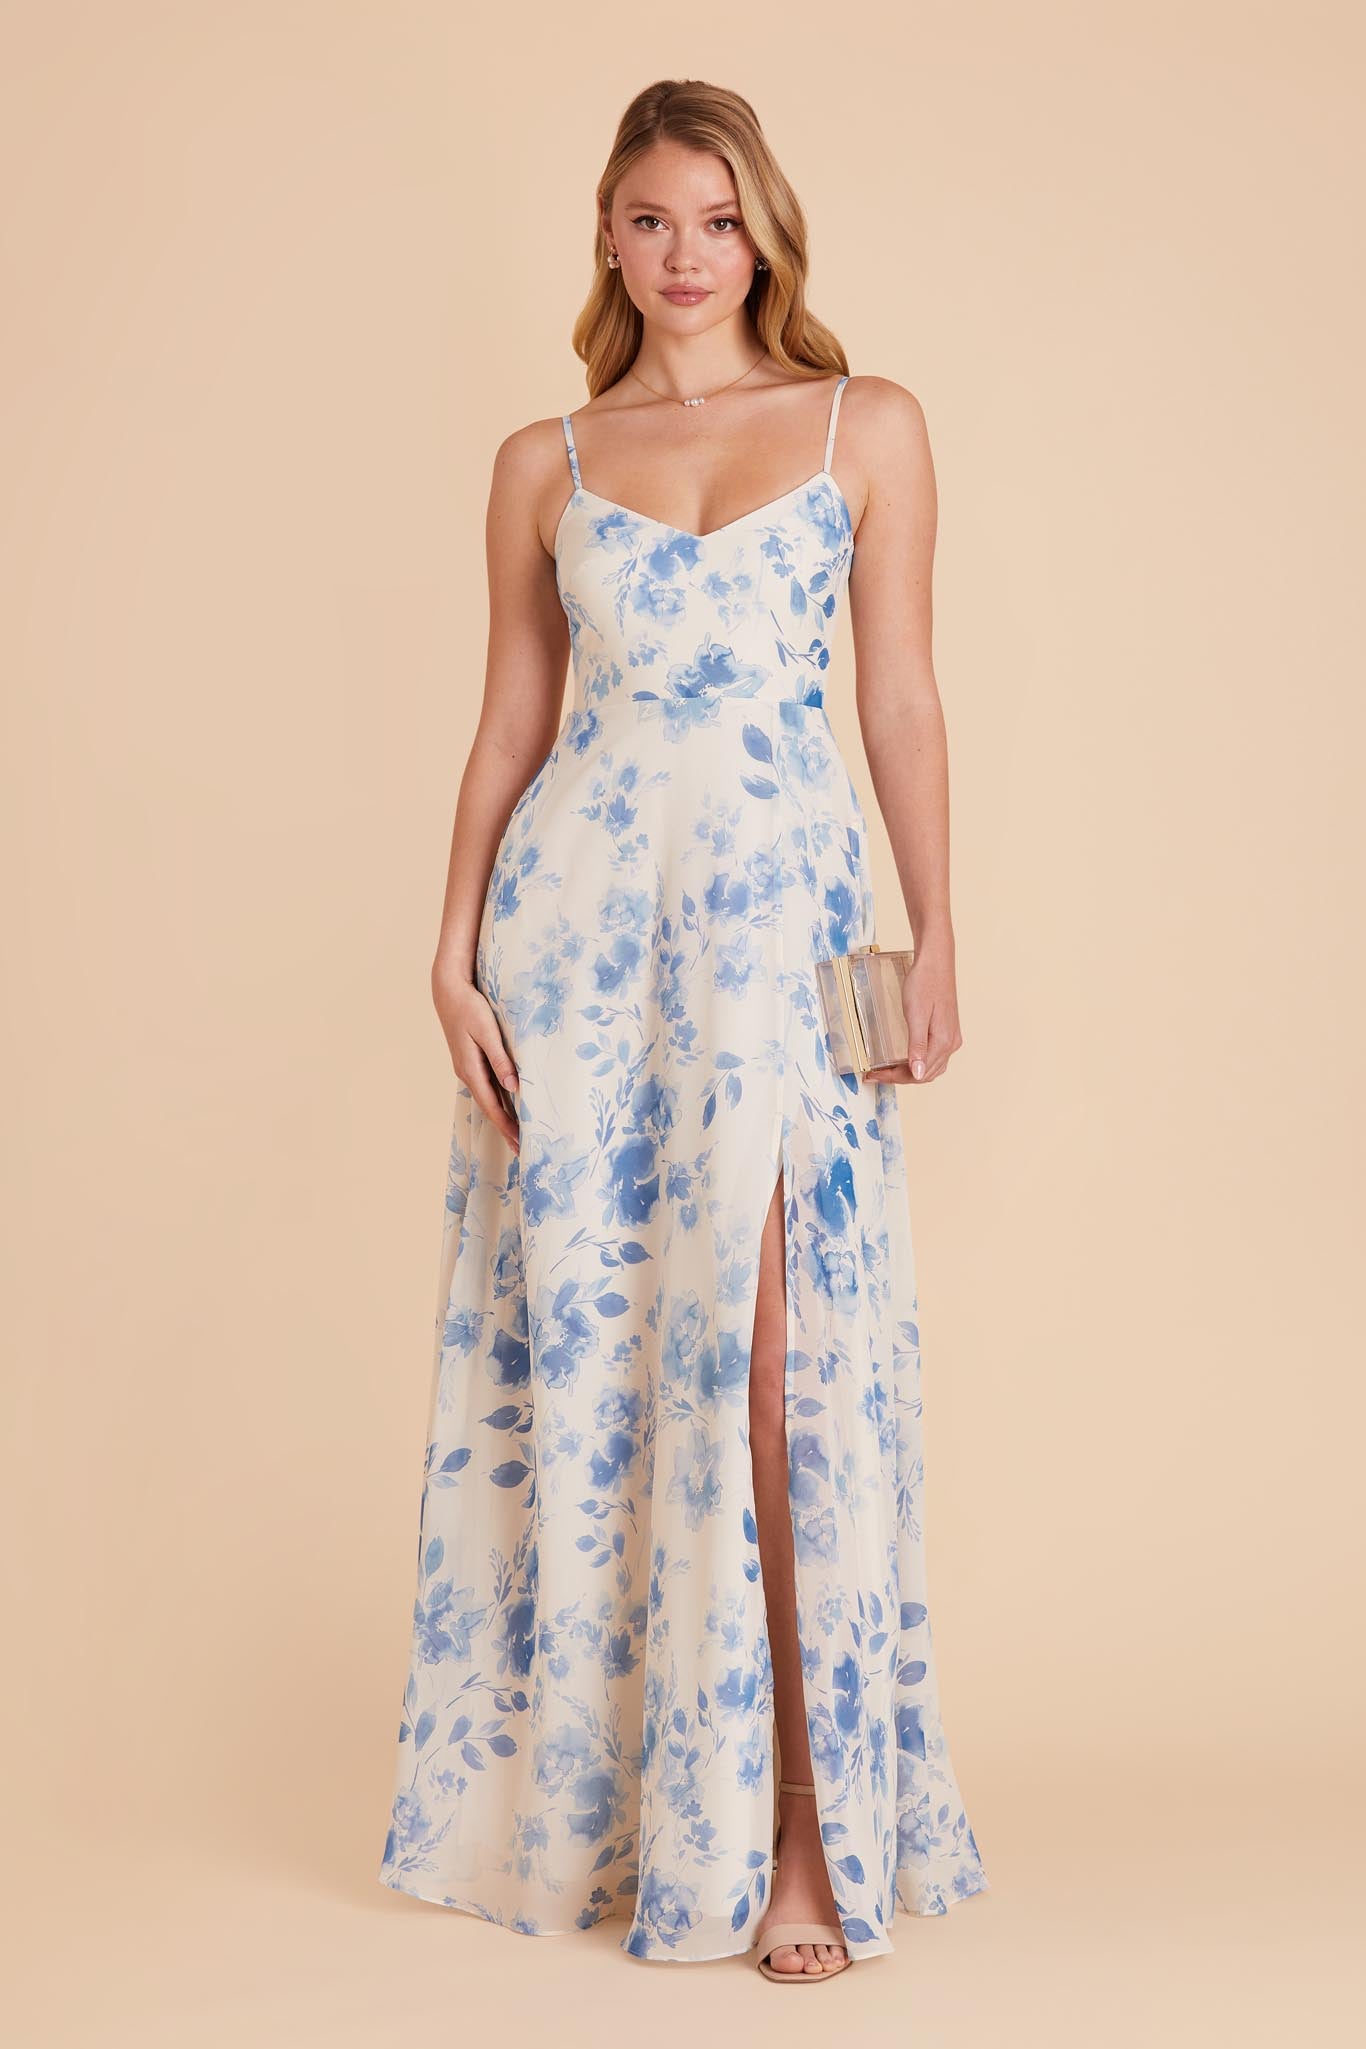 Blue Rococo Floral Devin Convertible Dress by Birdy Grey